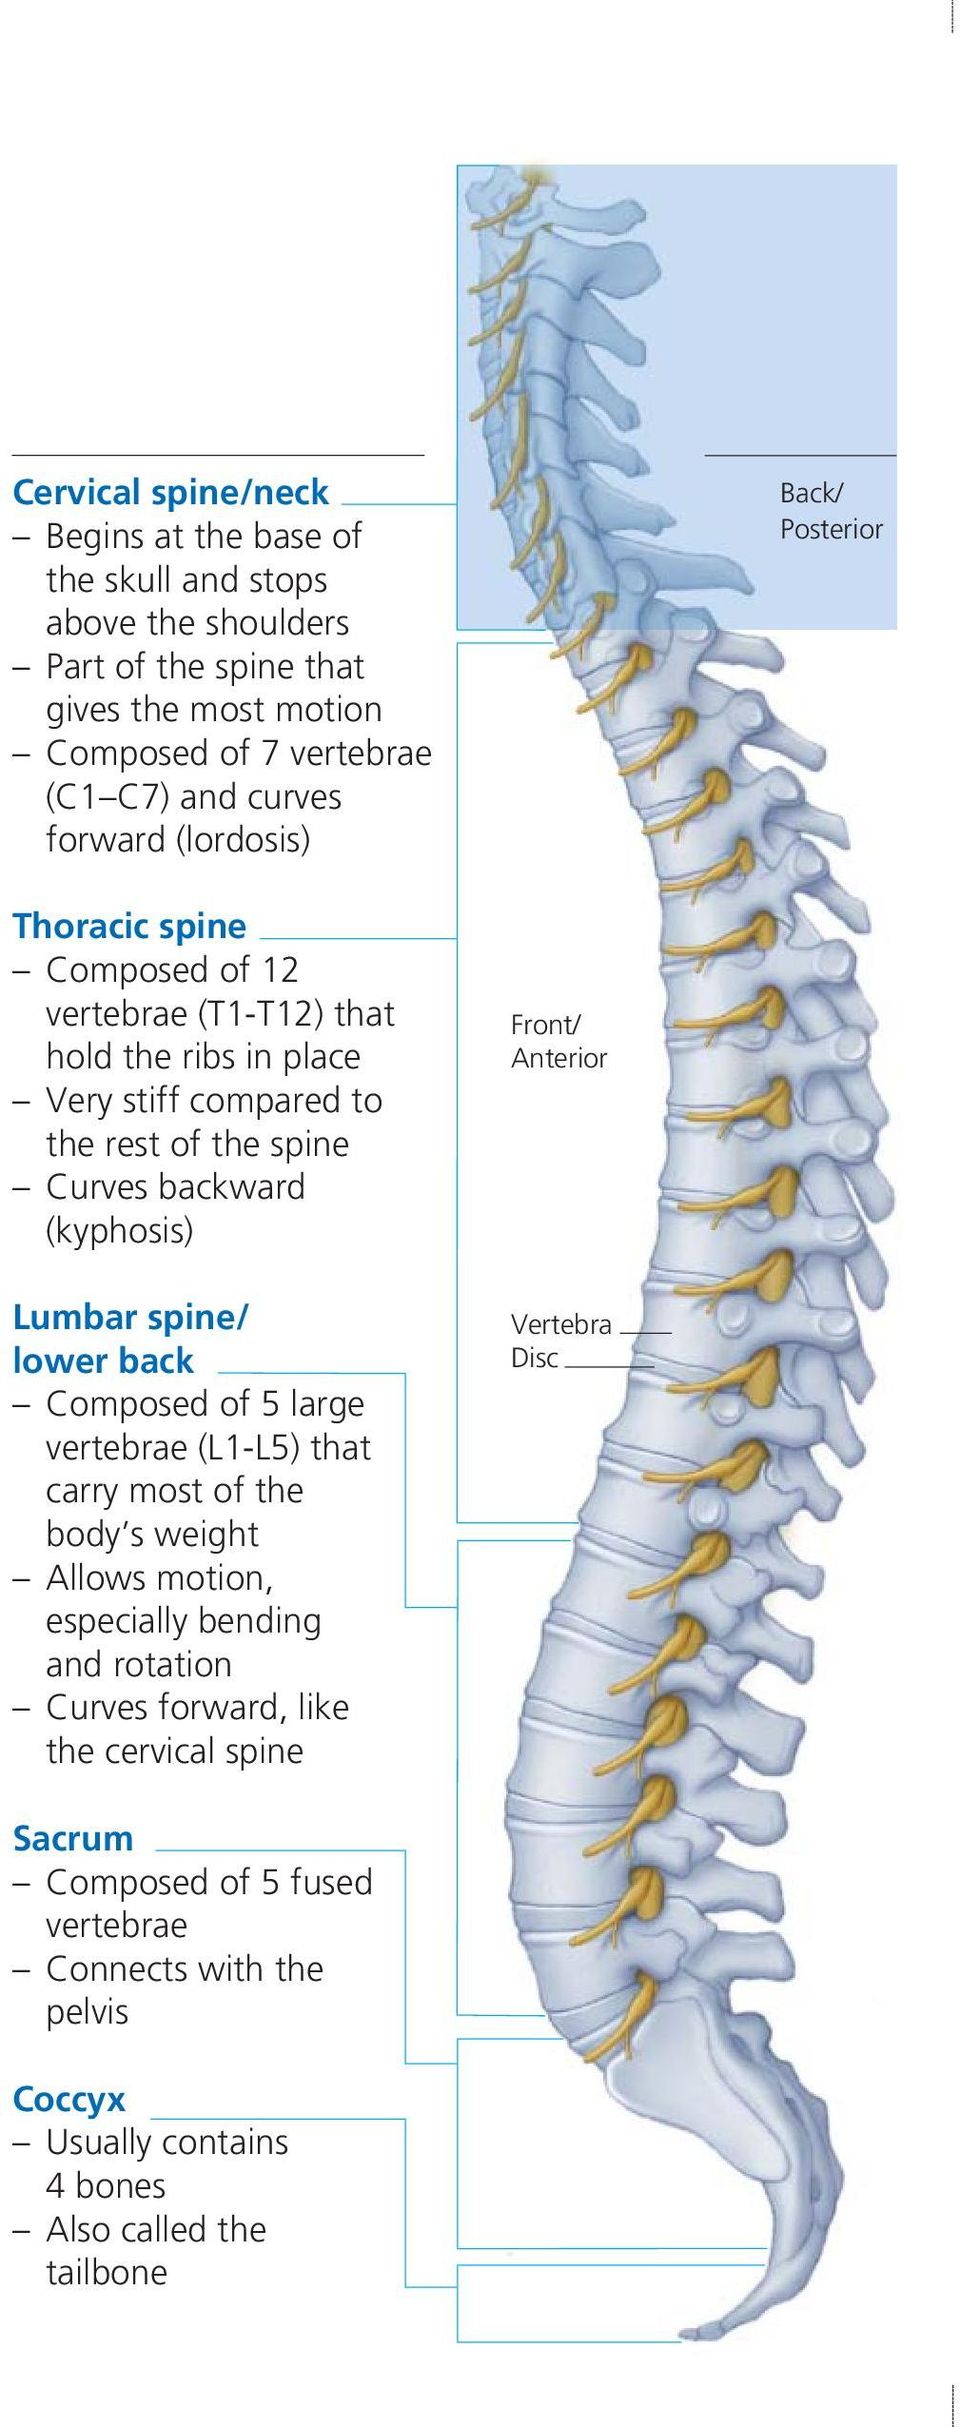 (kyphosis) Lumbar spine/ lower back Composed of 5 large vertebrae (L1-L5) that carry most of the body s weight Allows motion, especially bending and rotation Curves